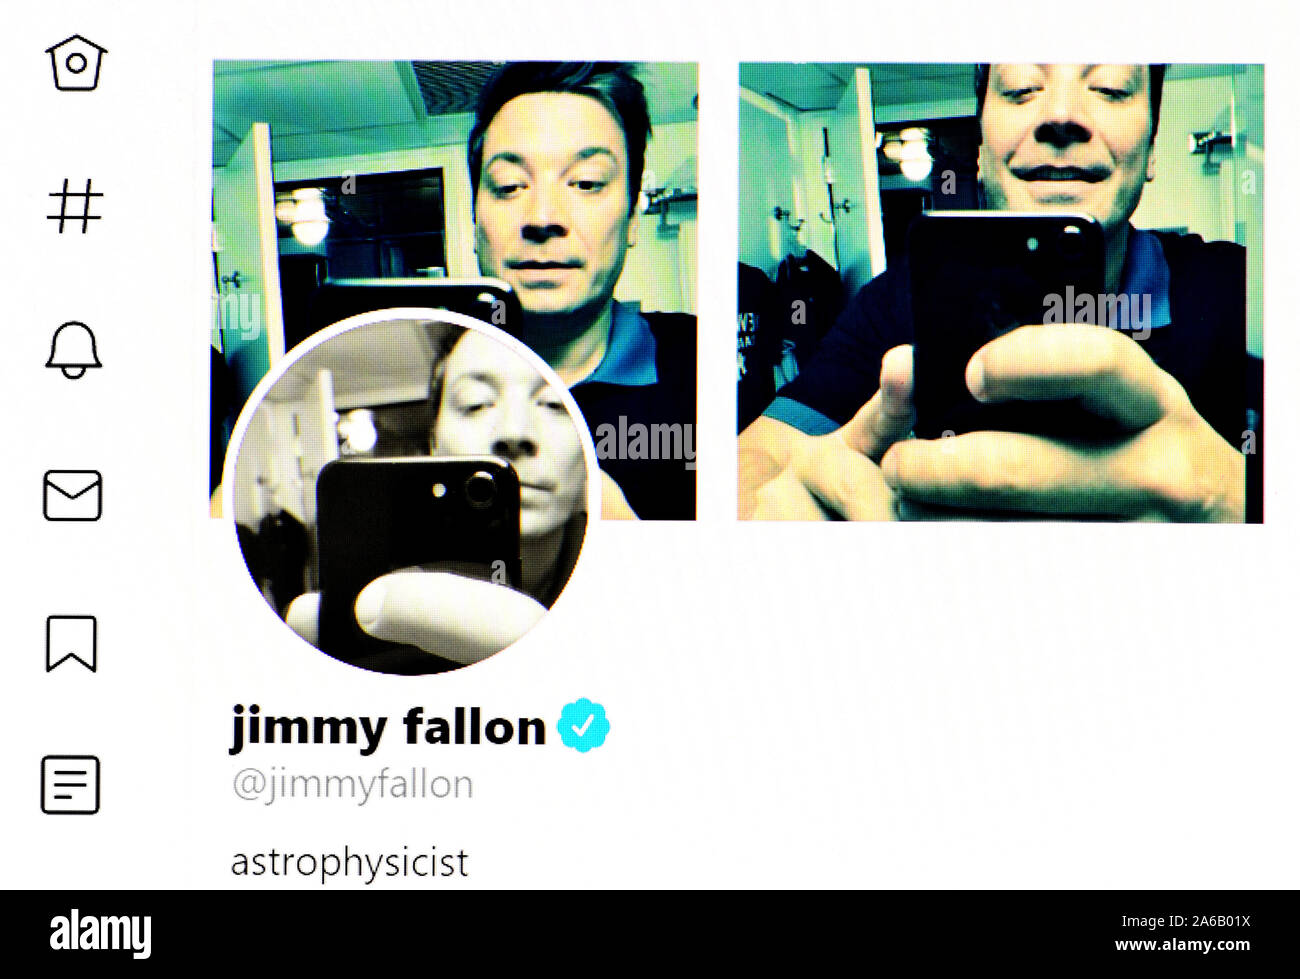 Twitter page (Oct 2019) Jimmy Fallon - astrophysicist Stock Photo